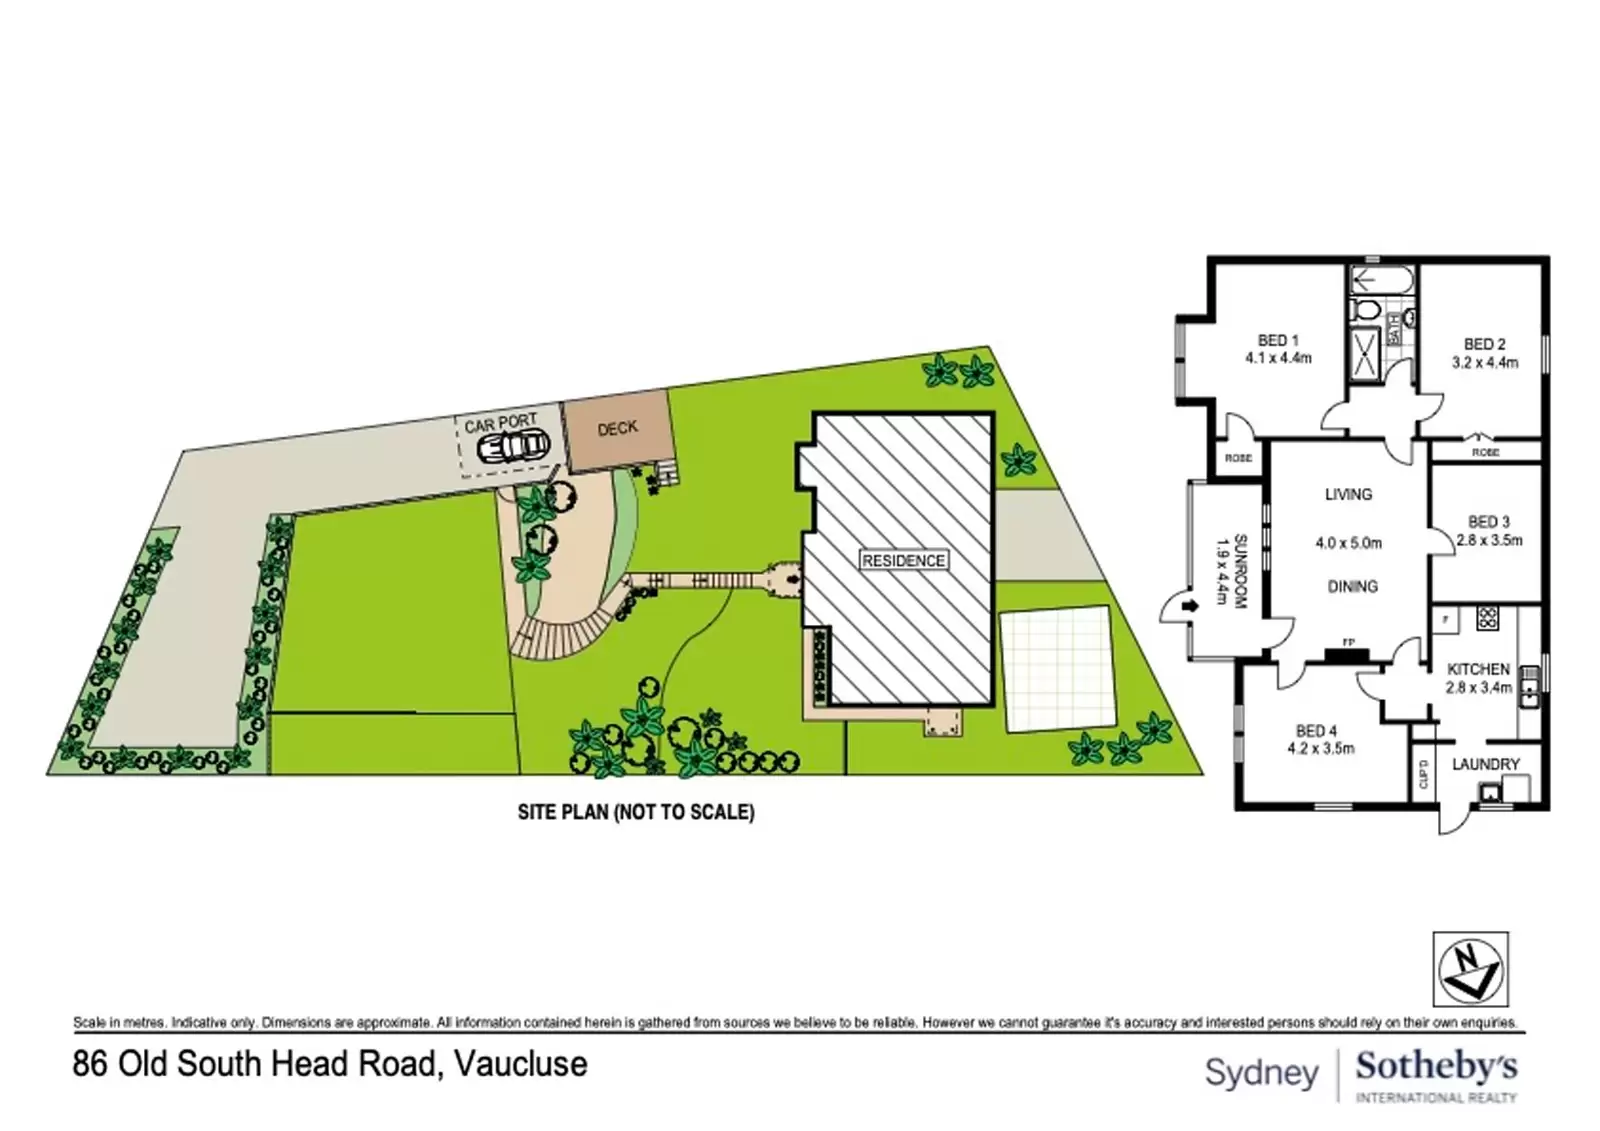 86 Old South Head Road, Vaucluse Sold by Sydney Sotheby's International Realty - image 1